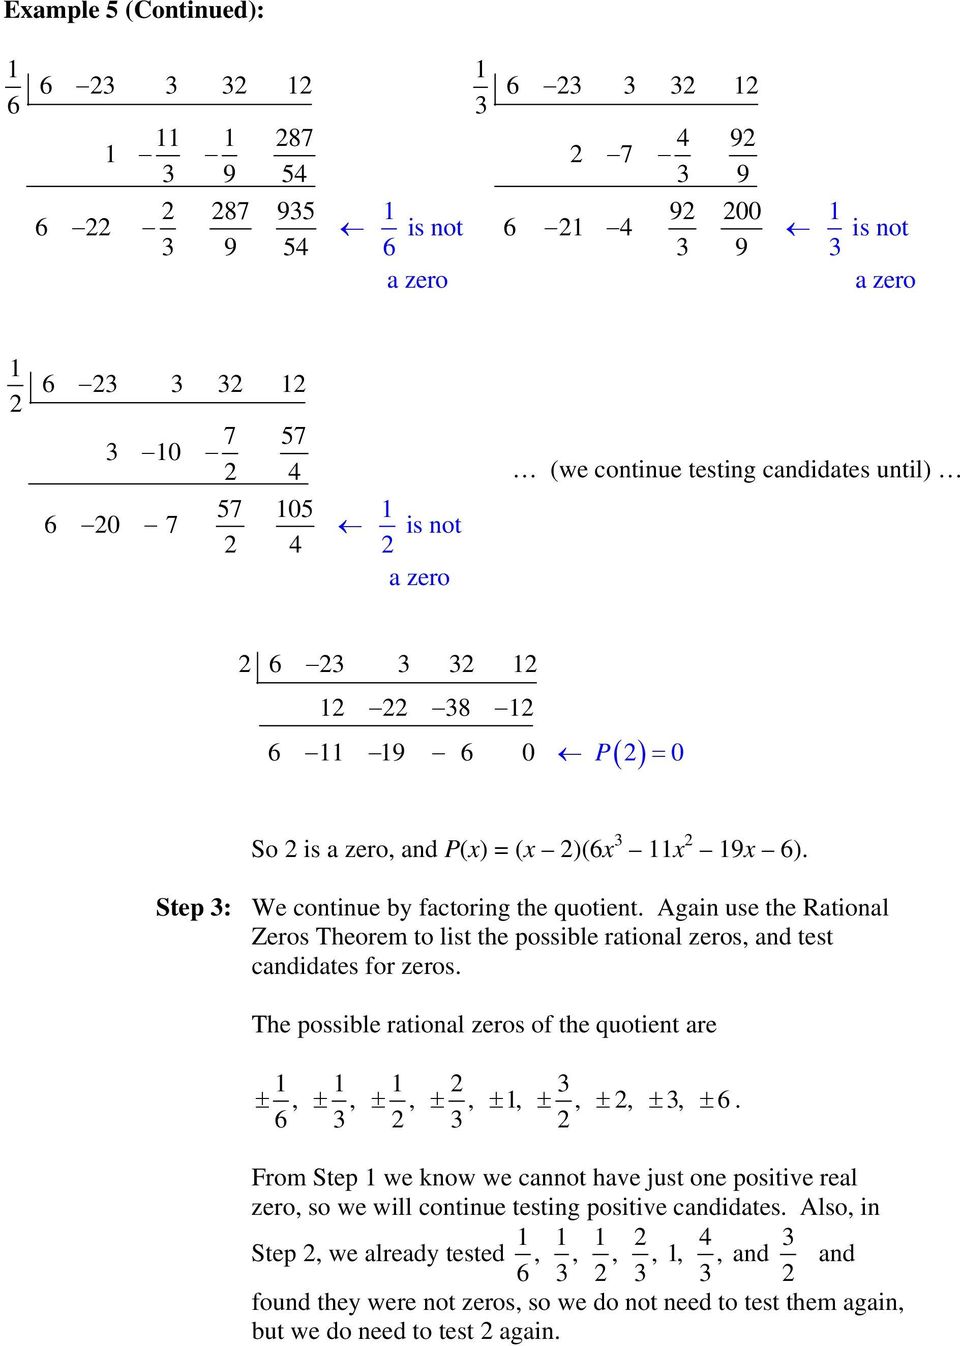 Again use the Rational Zeros Theorem to list the possible rational zeros, and test candidates for zeros. The possible rational zeros of the quotient are 3 ±, ±, ±, ±, ±, ±, ±, ± 3, ± 6.